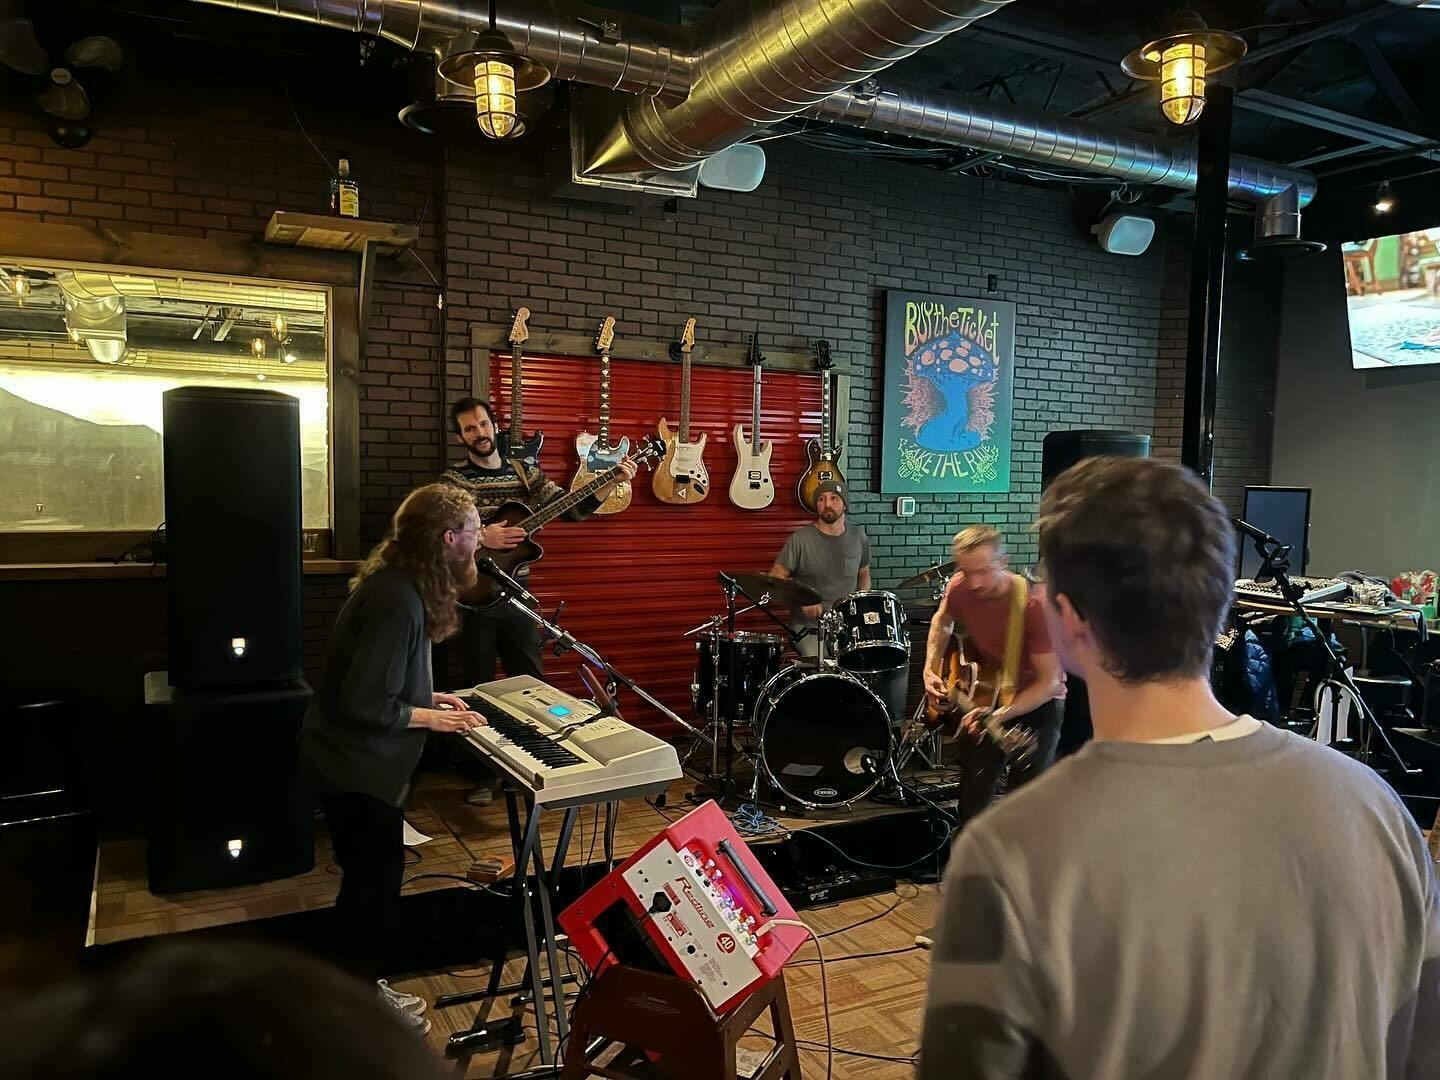 A band is performing in a brick-walled bar with guitars on the wall; an audience member watches from the foreground.